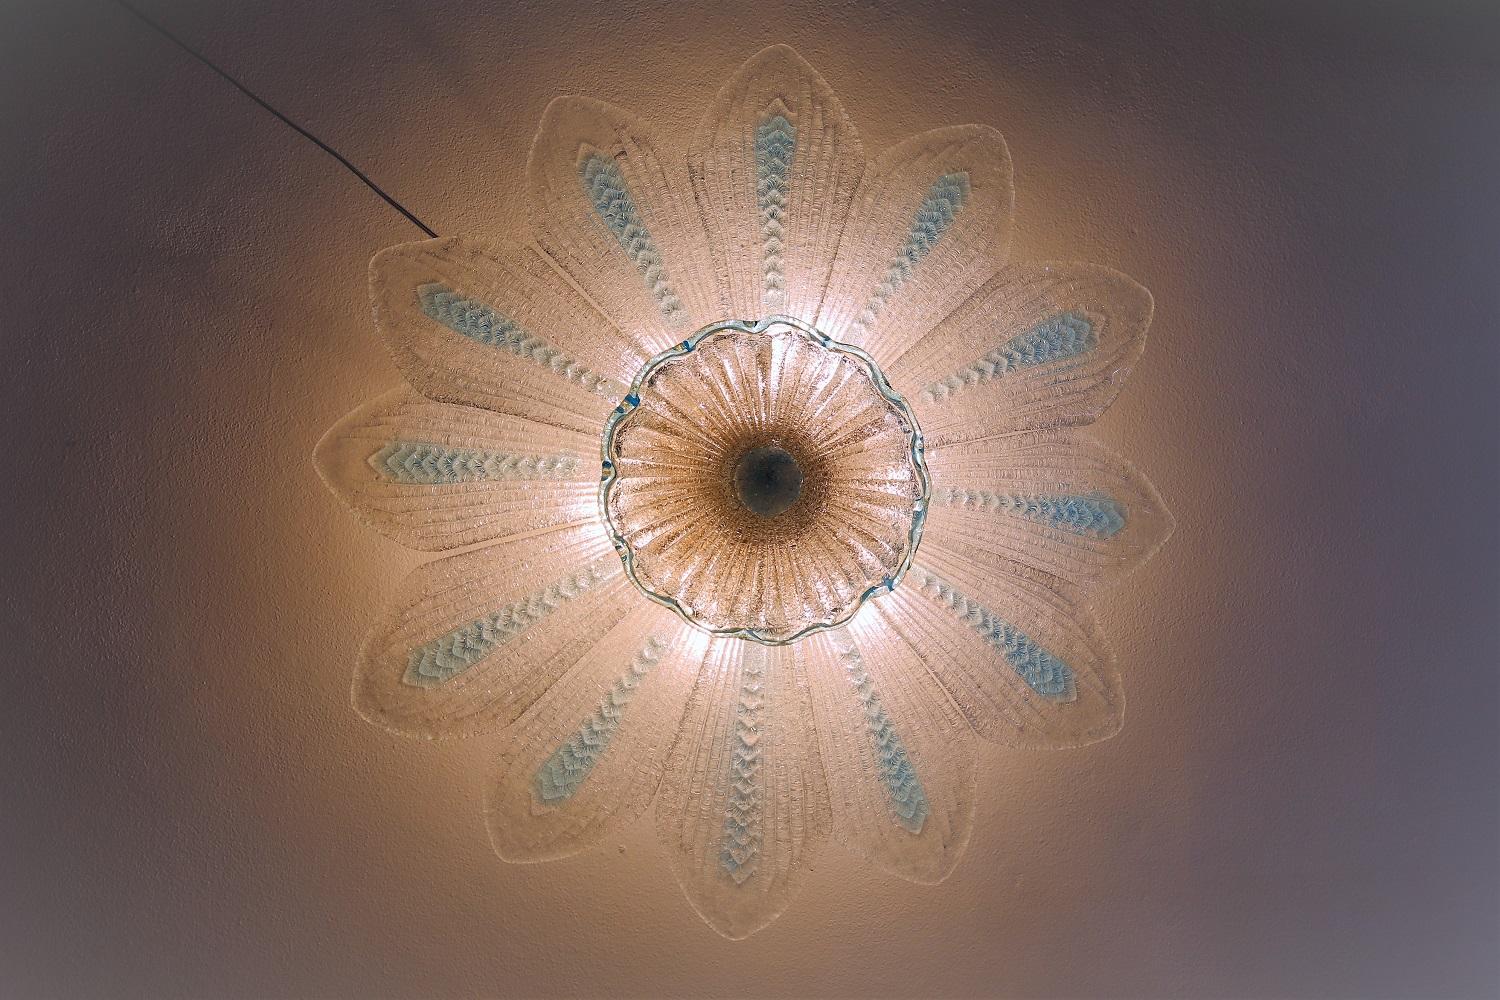 Large ceiling lamp in the shape of a big flower consisting of 12 large glass petals, a central glass rosette and closing glass button.
Made in Italy in the style of Barovier & Toso, Murano, in the 1970s.
The thick transparent glass with light blue